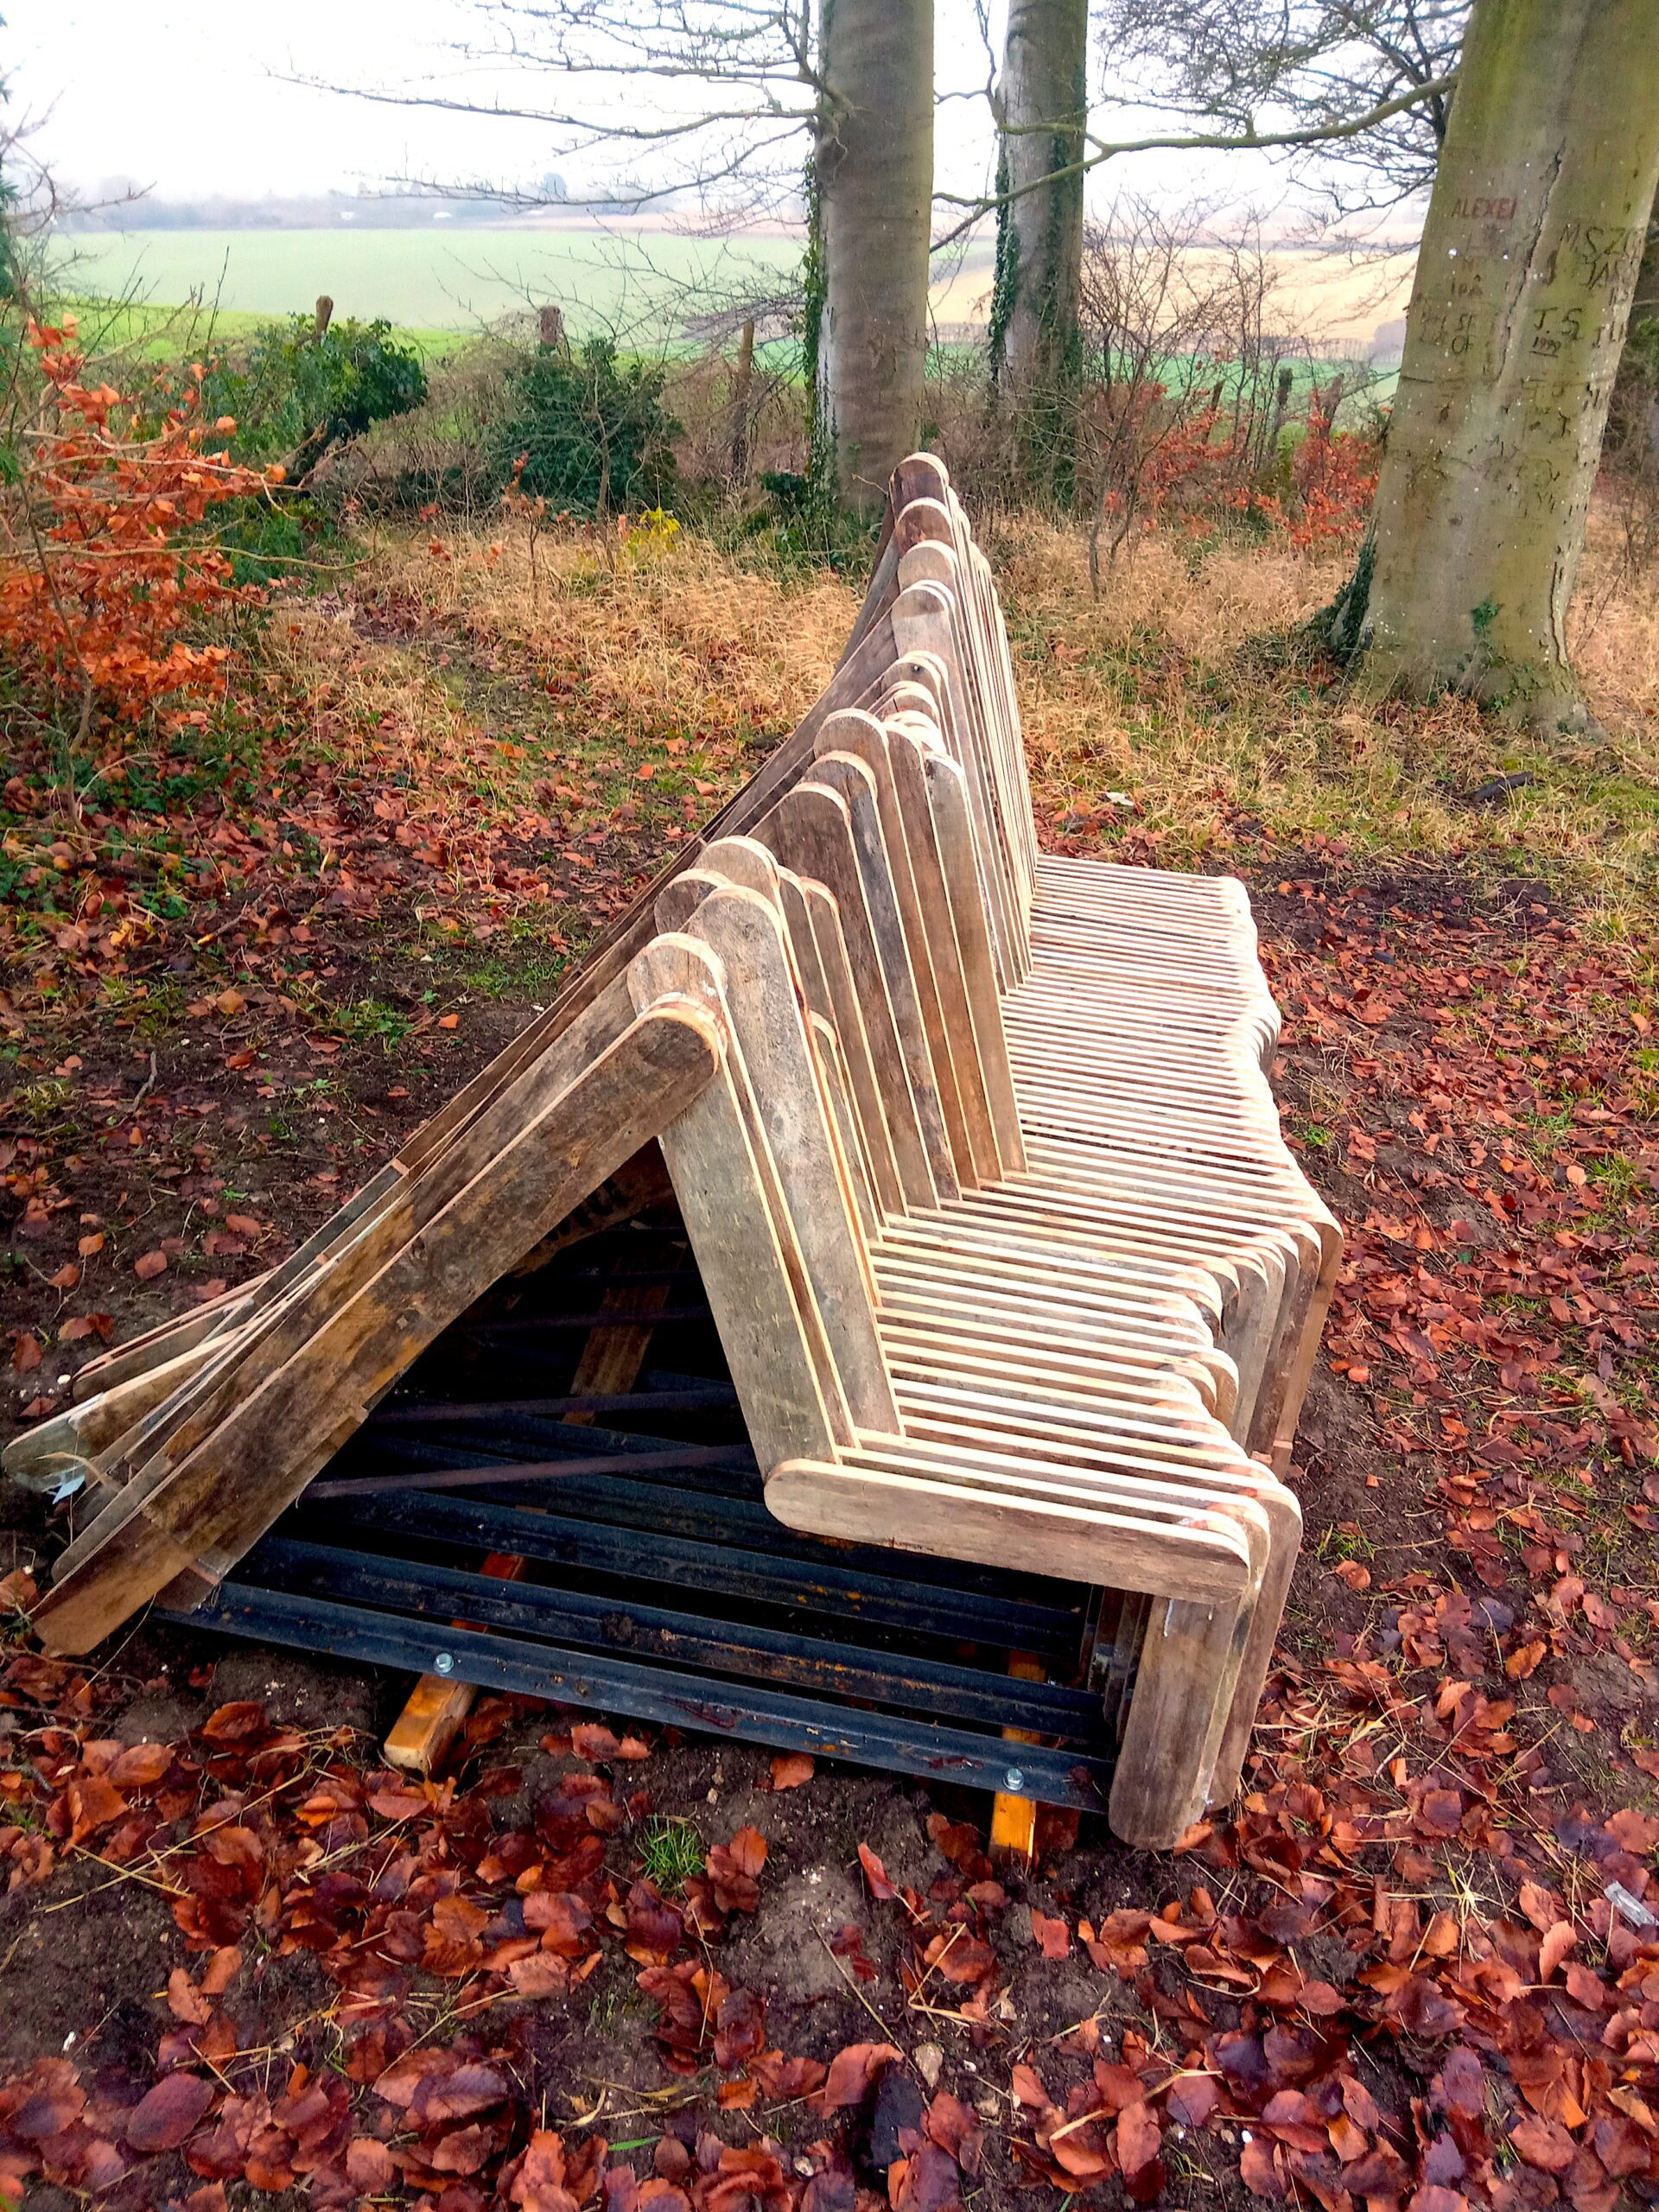 Autumn day, with trees and fields in the distance and Feel Our Voice sculptured bench in foreground.